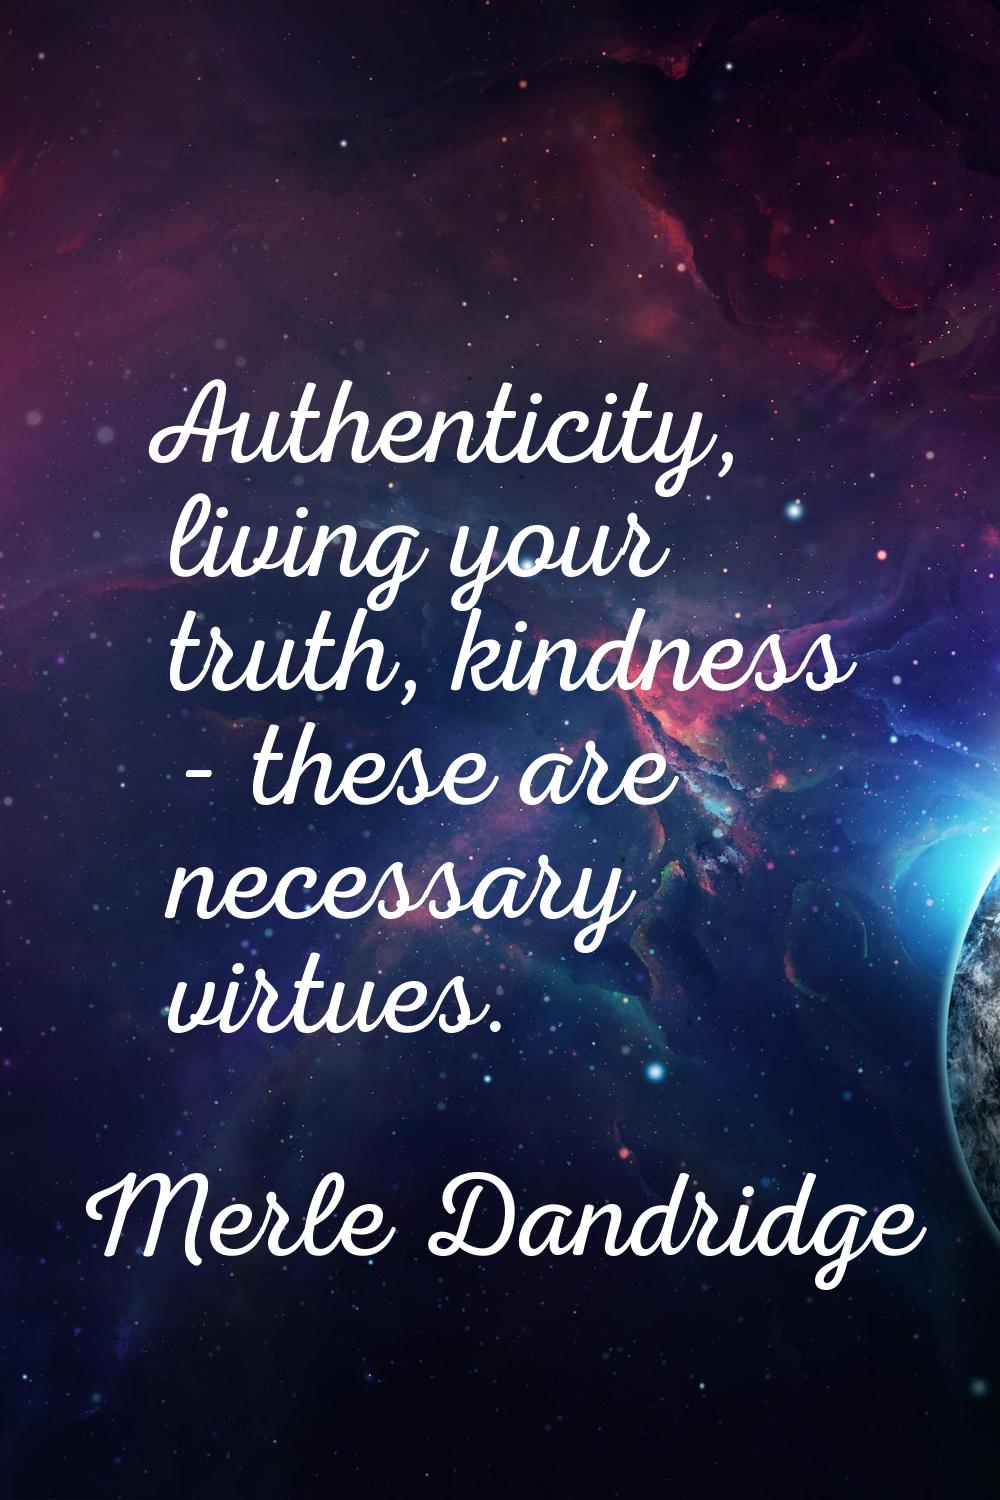 Authenticity, living your truth, kindness - these are necessary virtues.